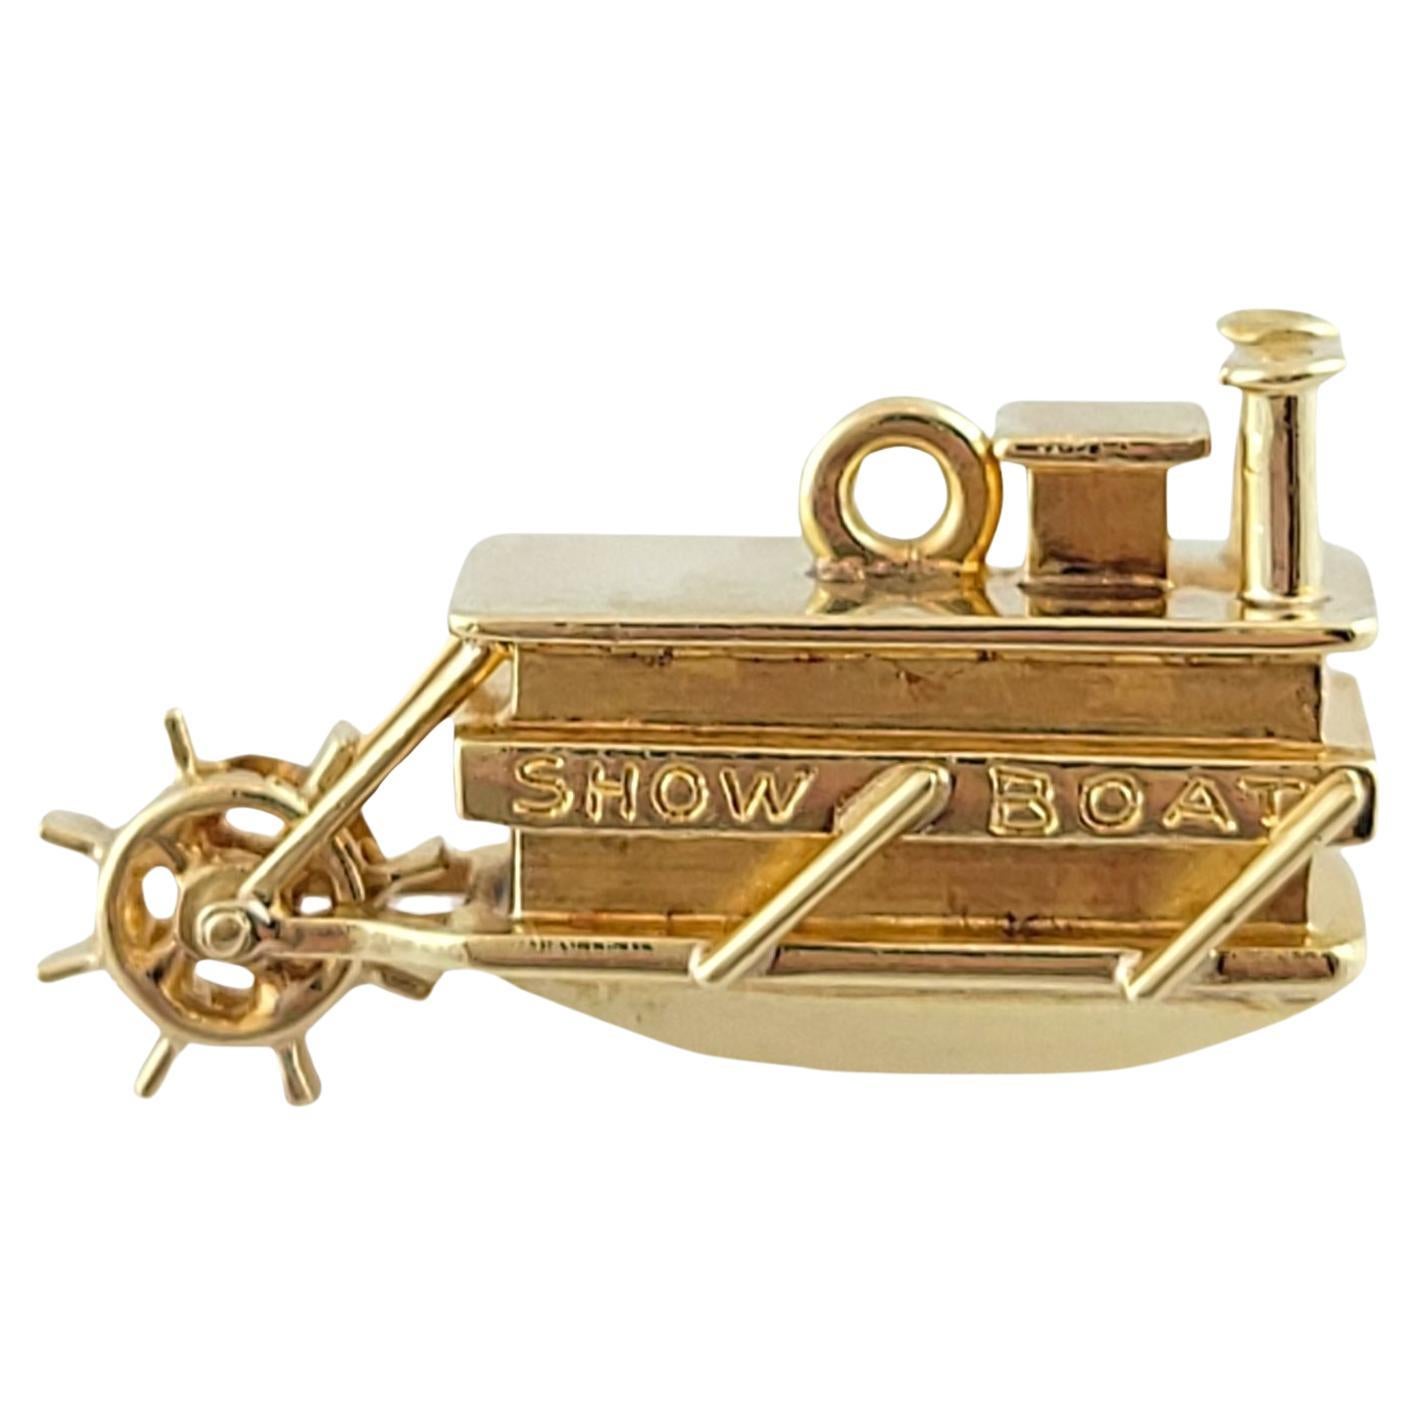  14K Yellow Gold Show Boat Charm #14803 For Sale